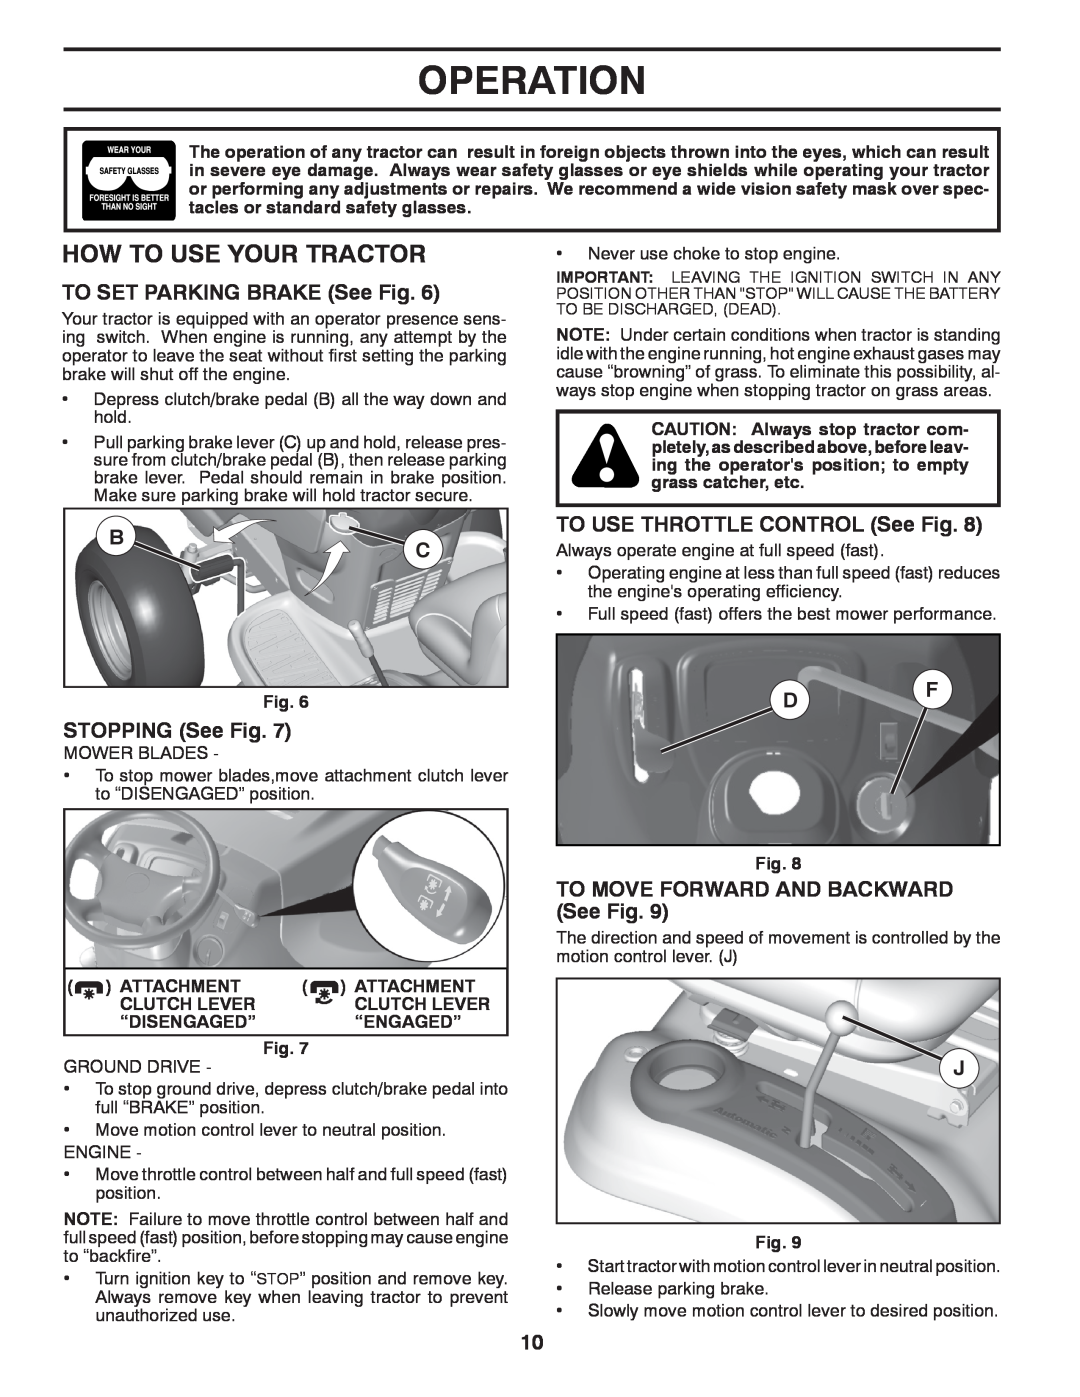 Poulan 435712, 96042007202 manual How To Use Your Tractor, Operation, TO SET PARKING BRAKE See Fig, STOPPING See Fig 